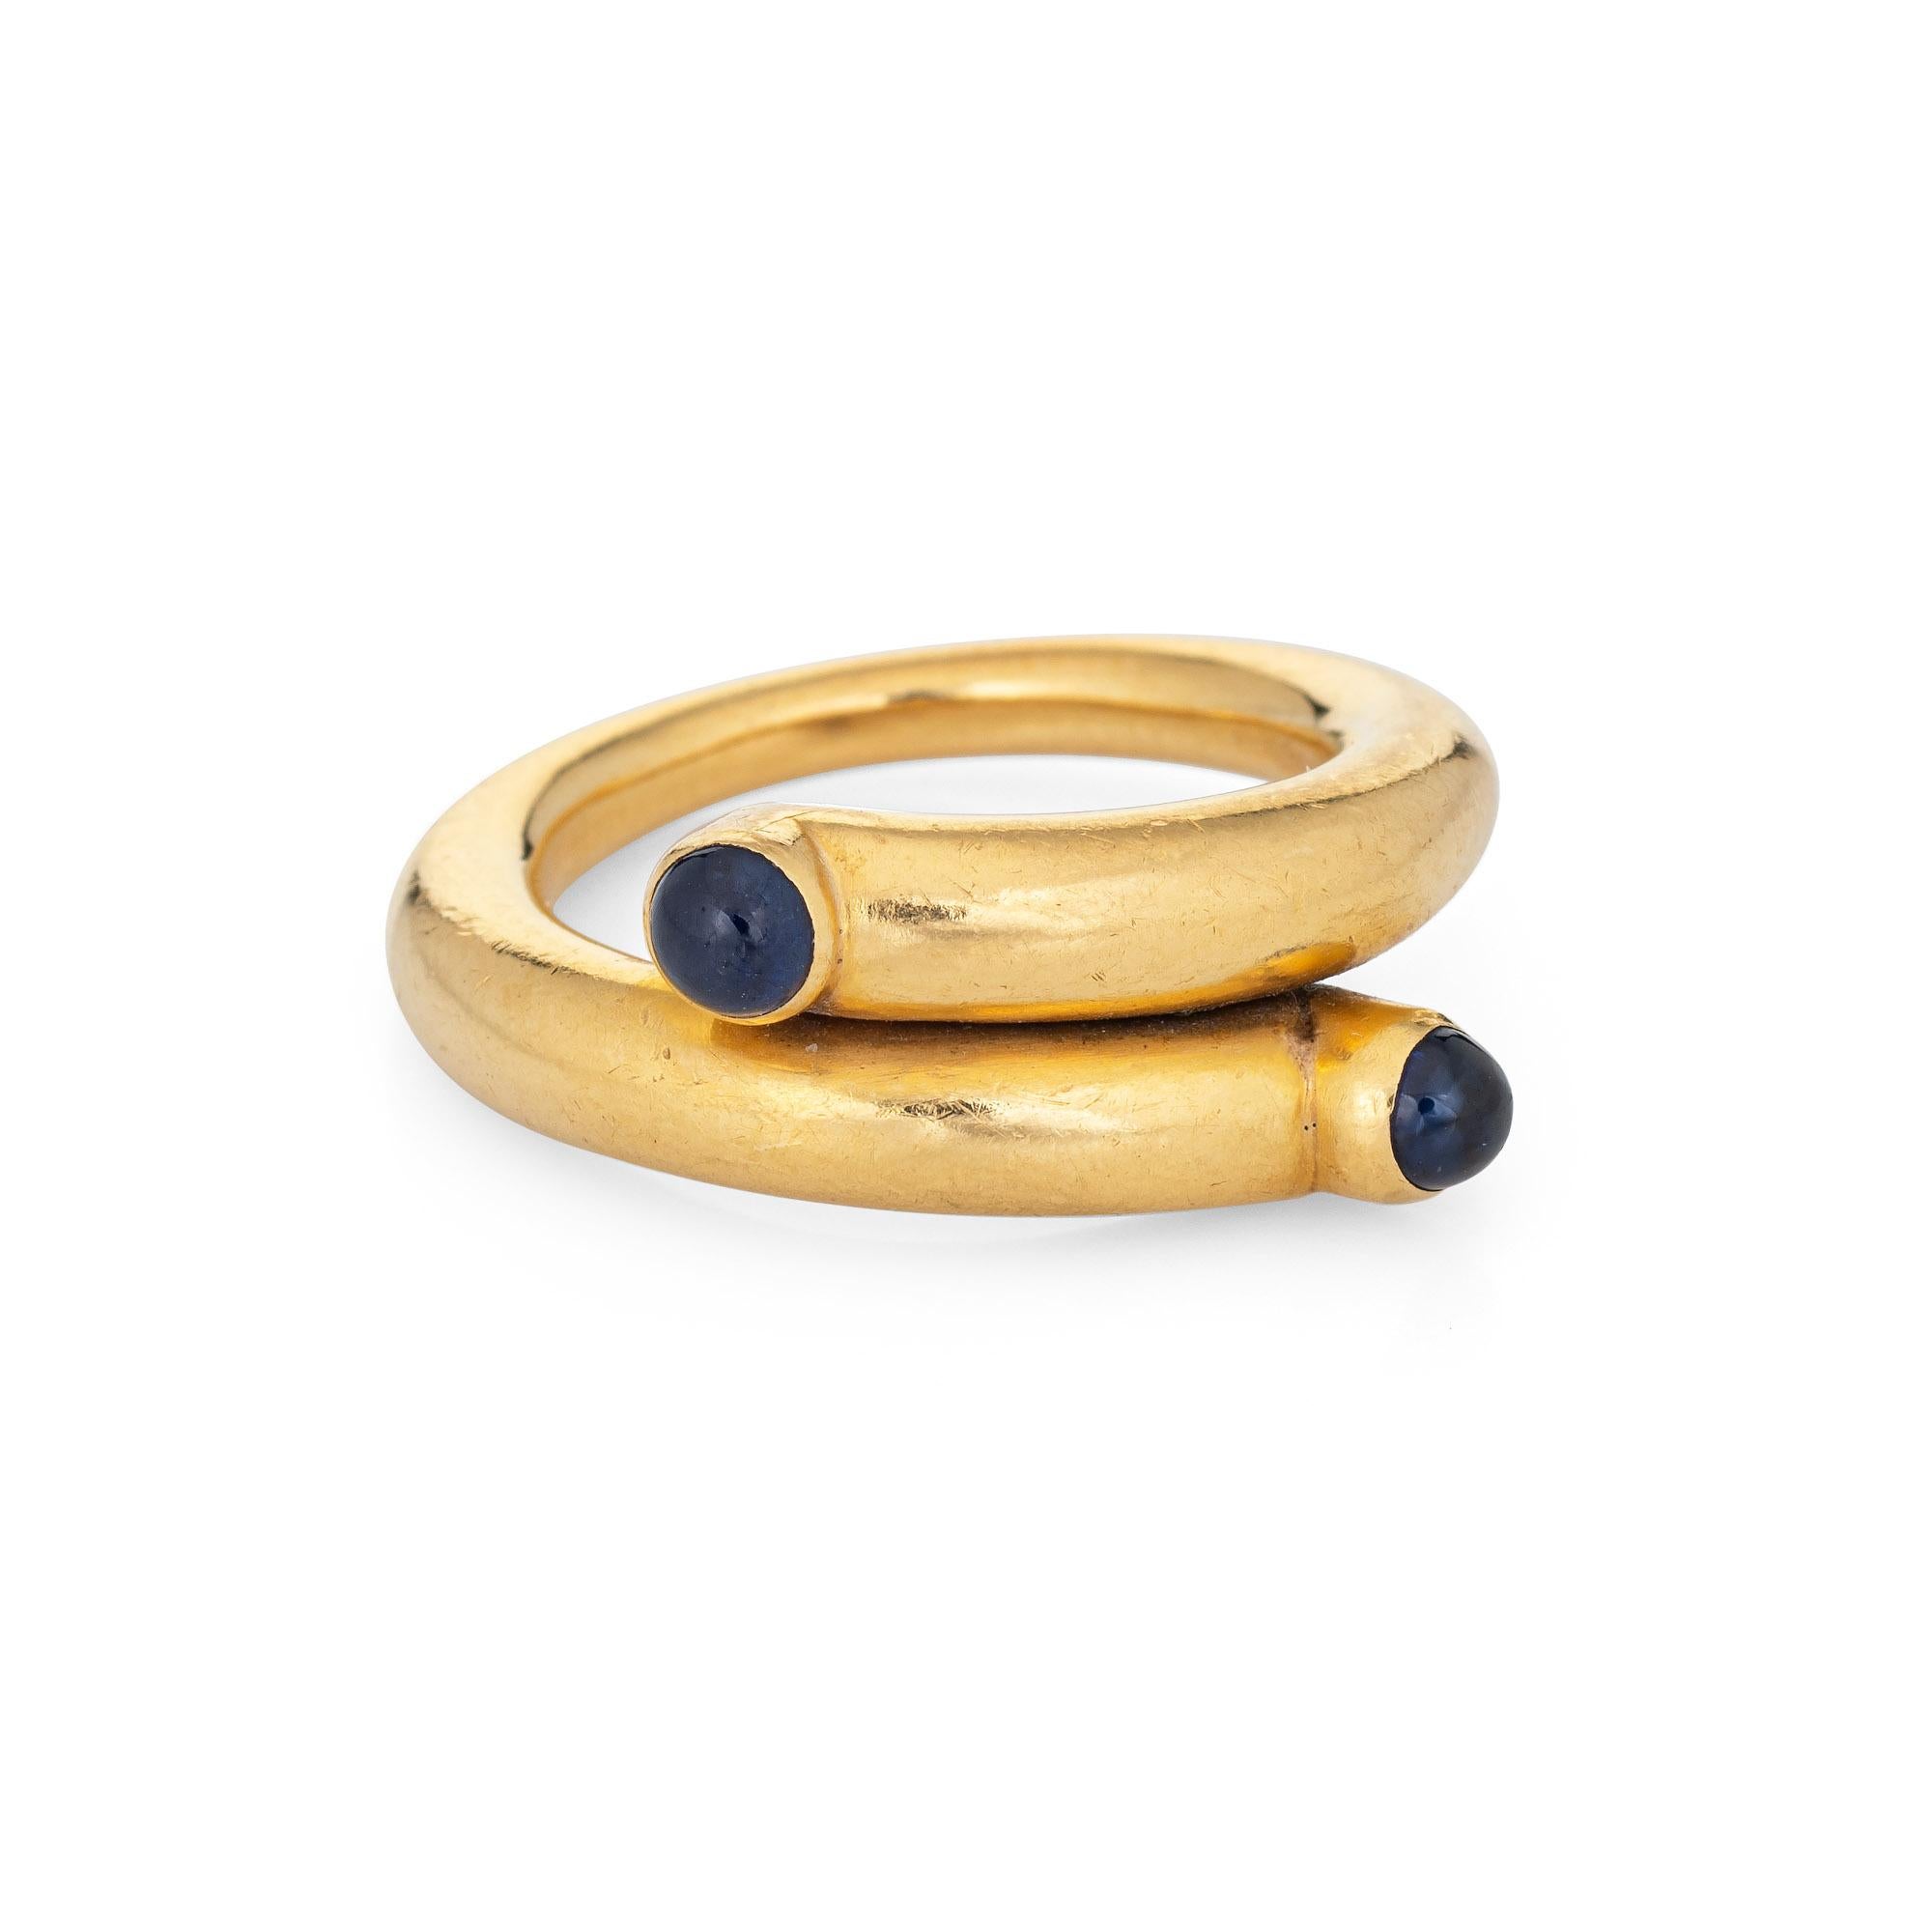 Stylish vintage Tiffany & Co Jean Schlumberger sapphire ring crafted in 18k yellow gold.   

Two 3.5mm cabochon cut sapphires are set into the band. The sapphires are in very good condition and free of cracks or chips.

The iconic 'coil' ring